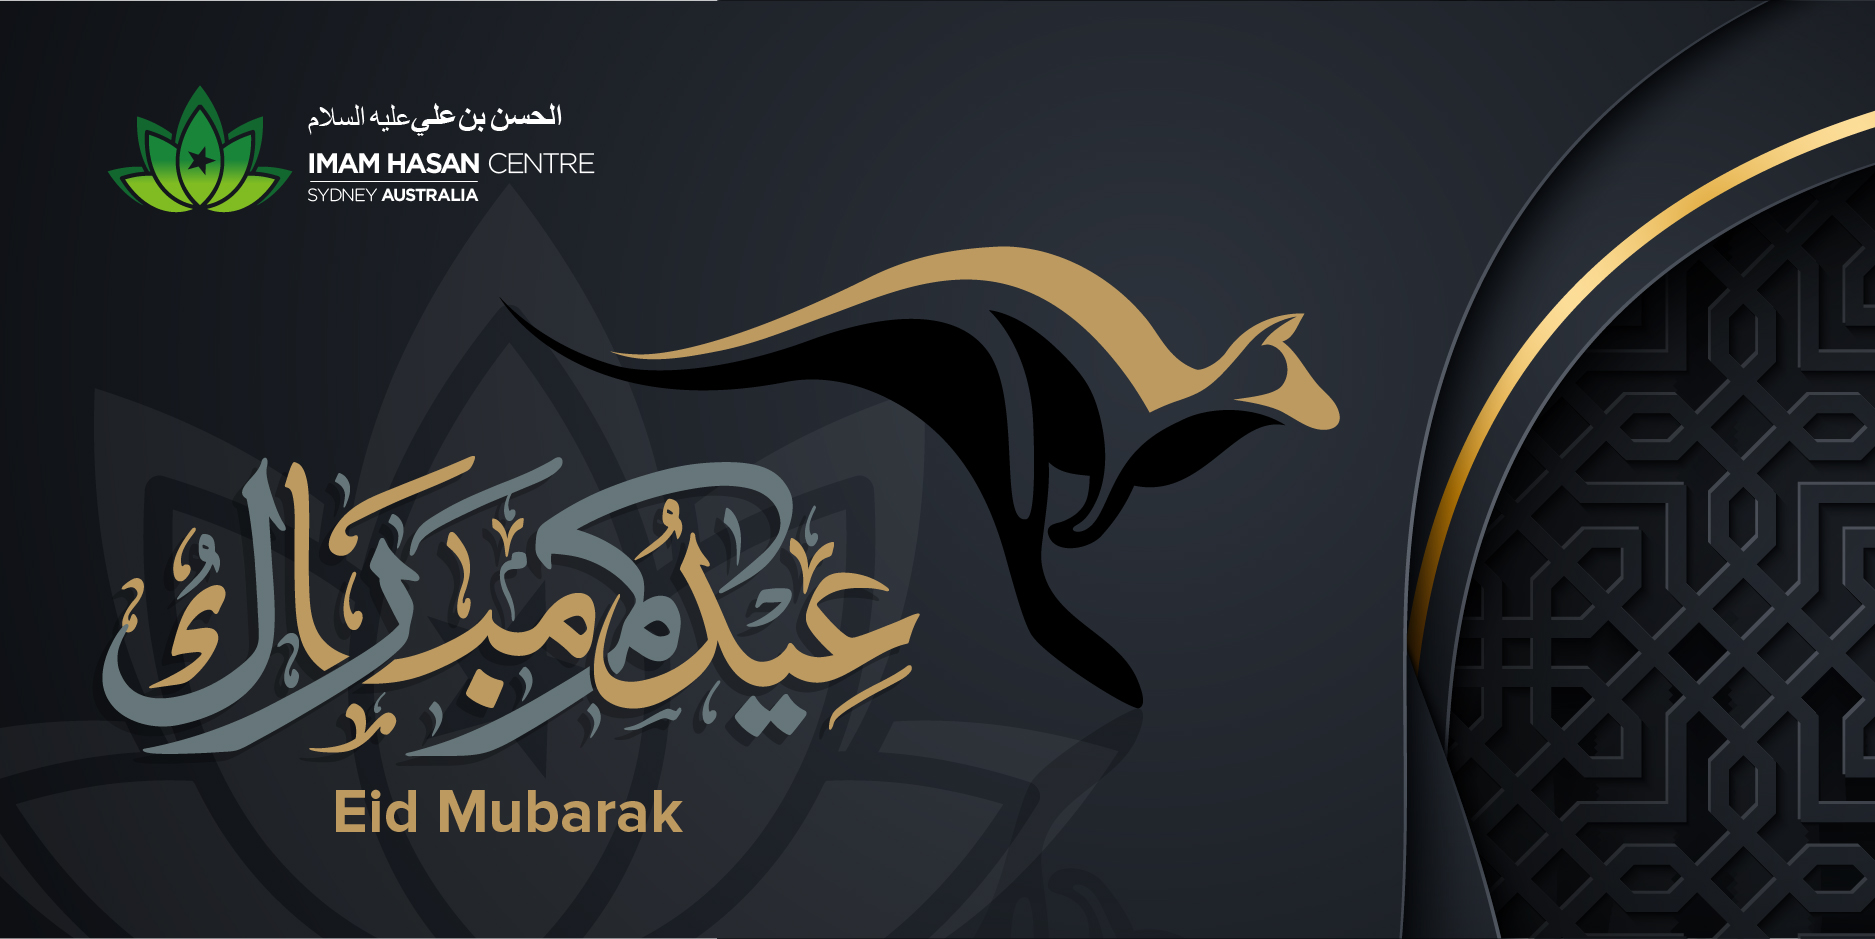 Eid Mubarak – May Allah bless you and your families.